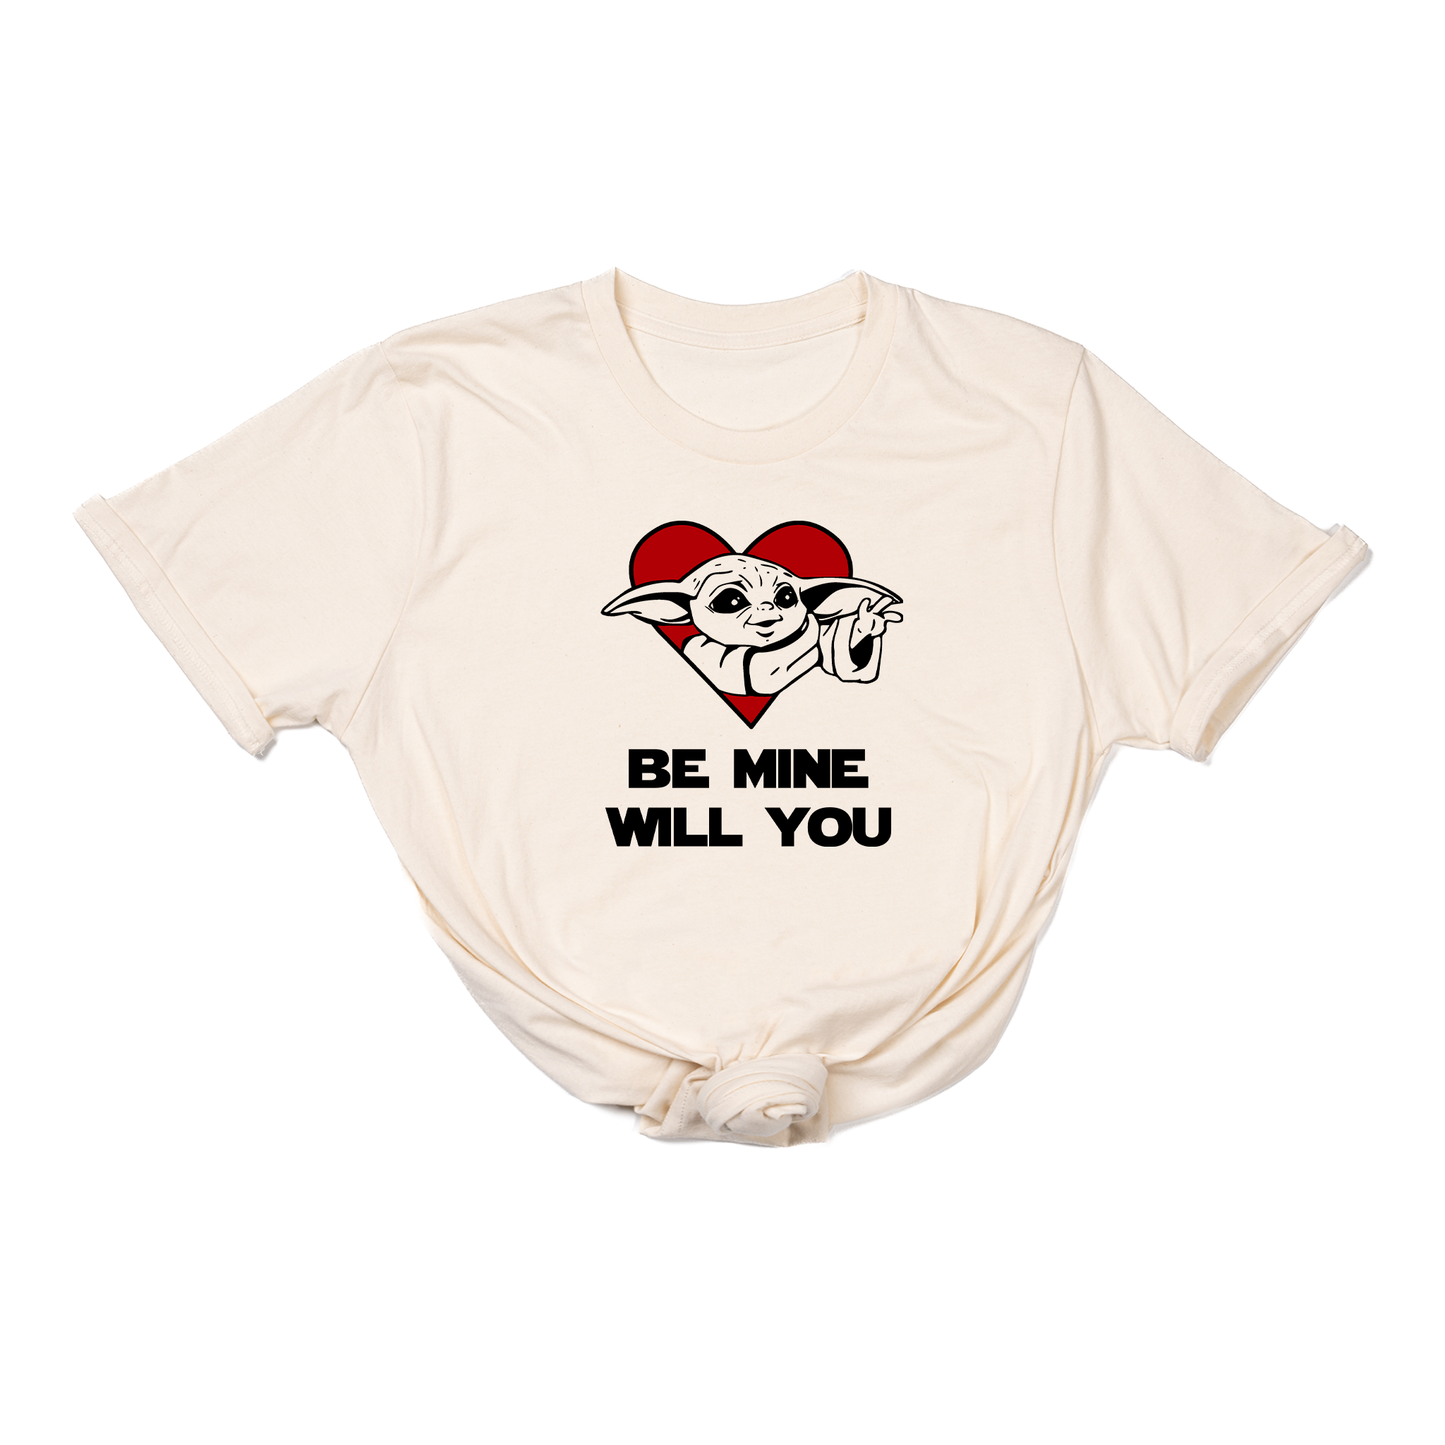 Be Mine Will You (Baby Yoda Inspired,  Across Front) - Tee (Natural)